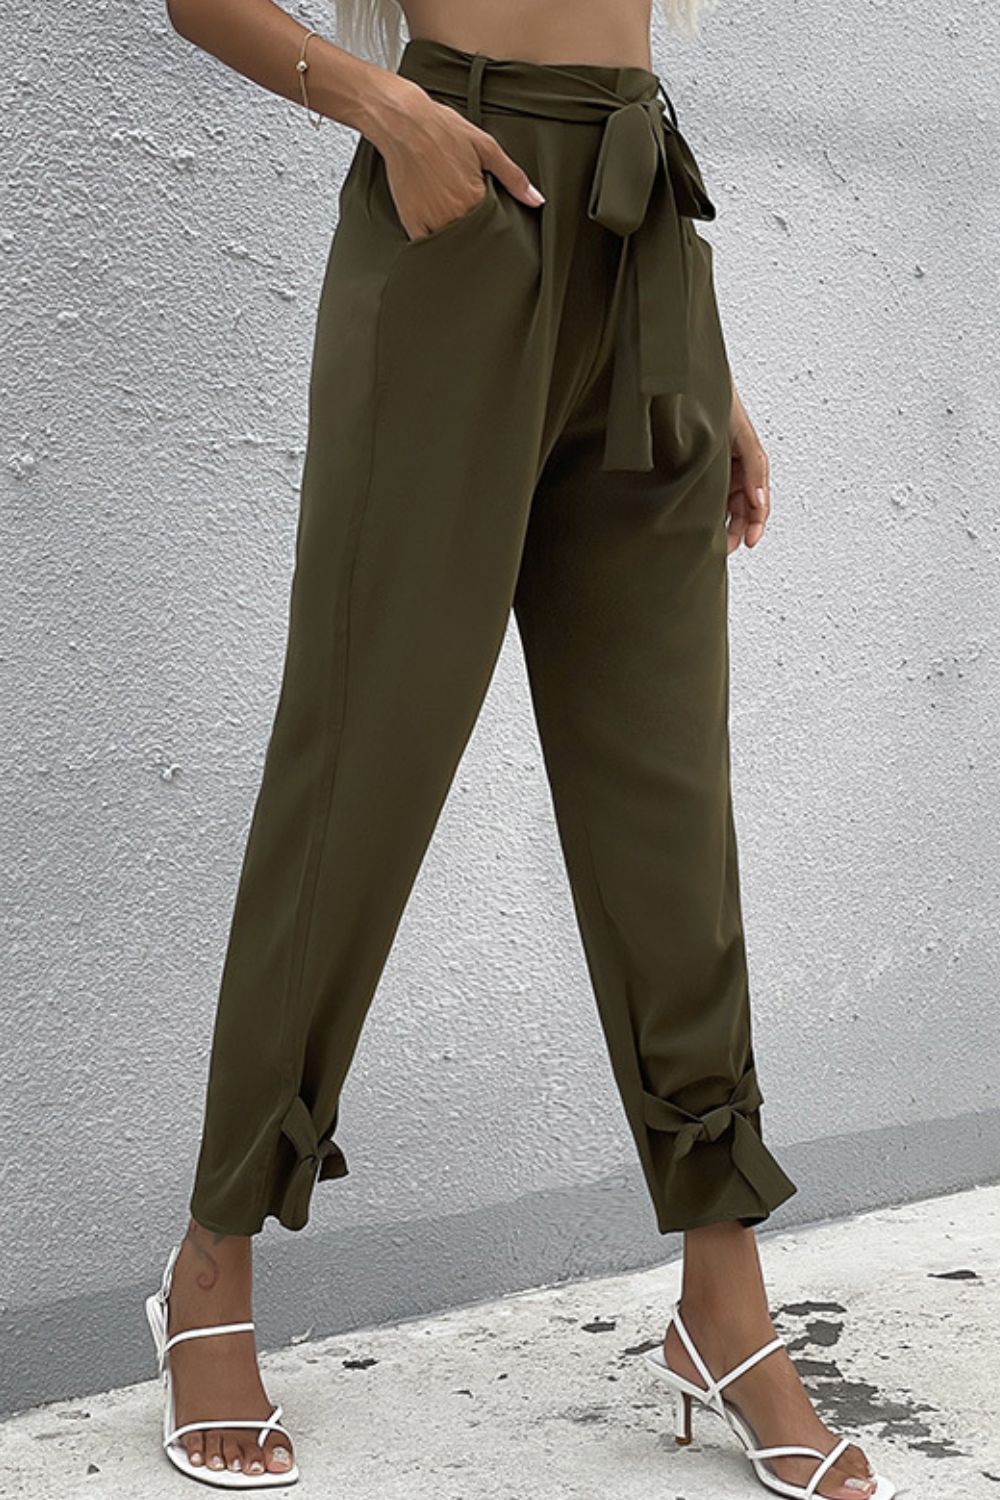 Tie Detail Belted Pants with Pockets - Bottoms - Pants - 3 - 2024